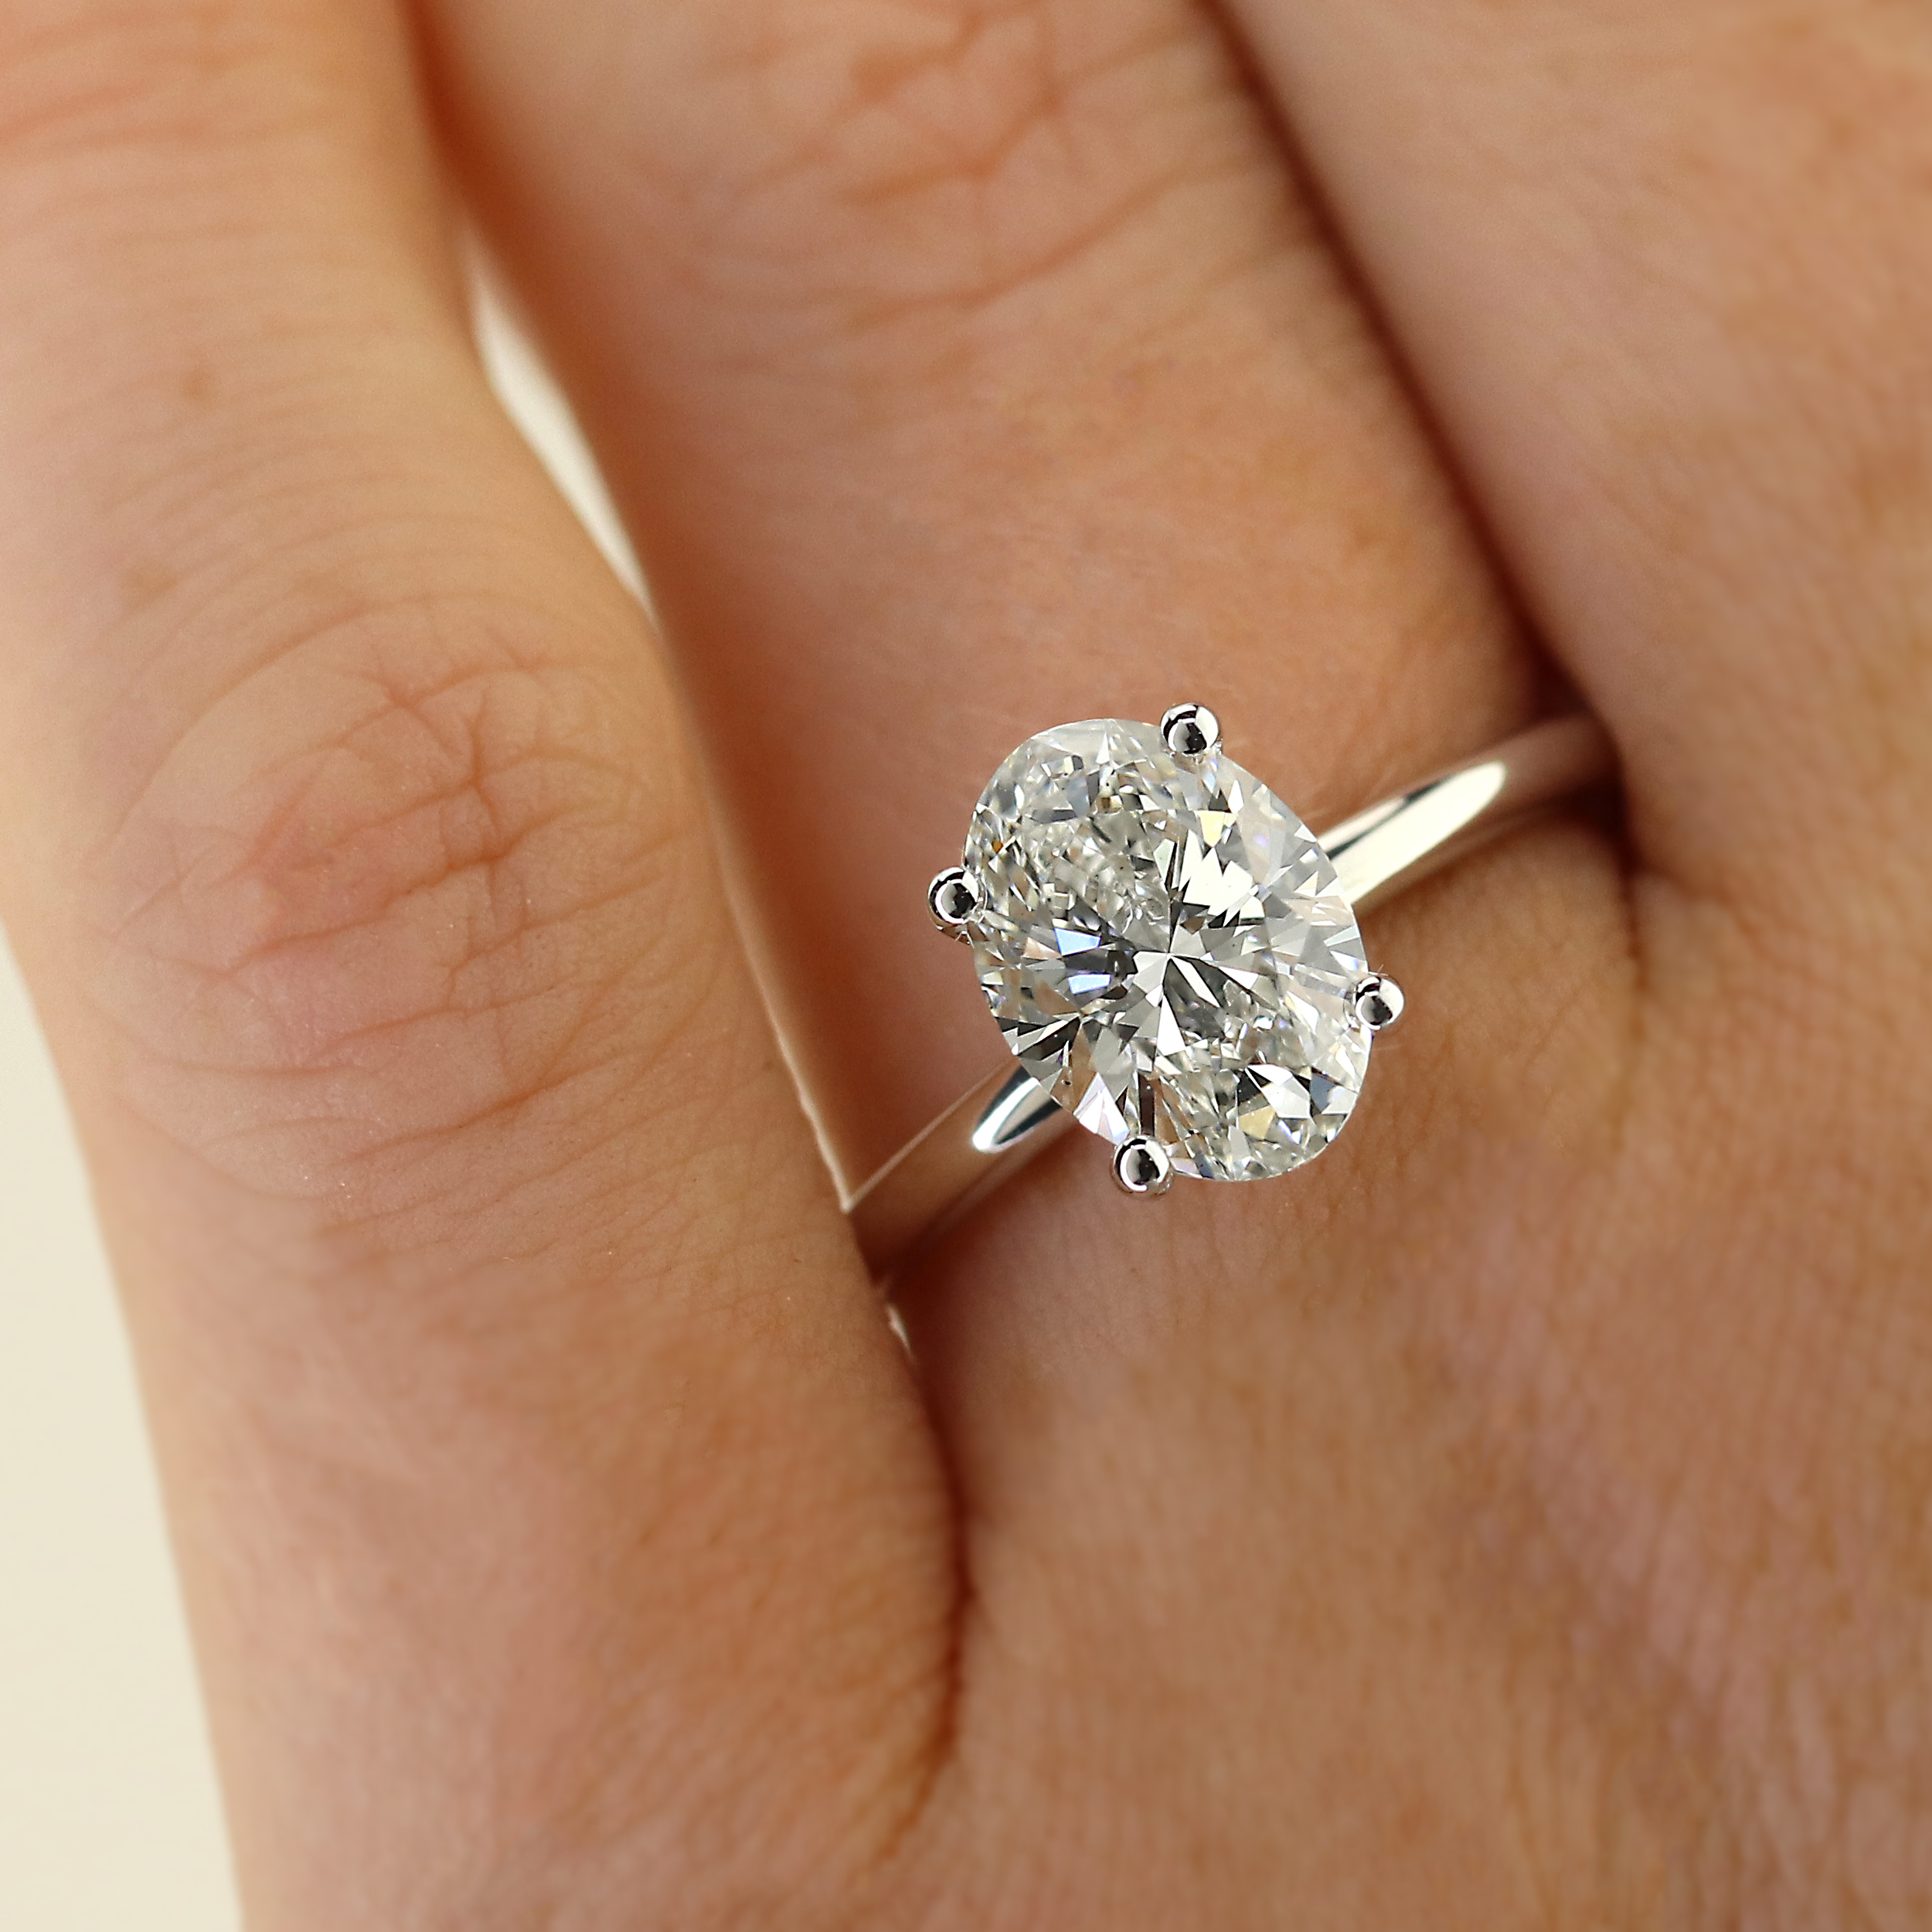 Investing In Timeless Diamond Jewelry - A Testament To Forever